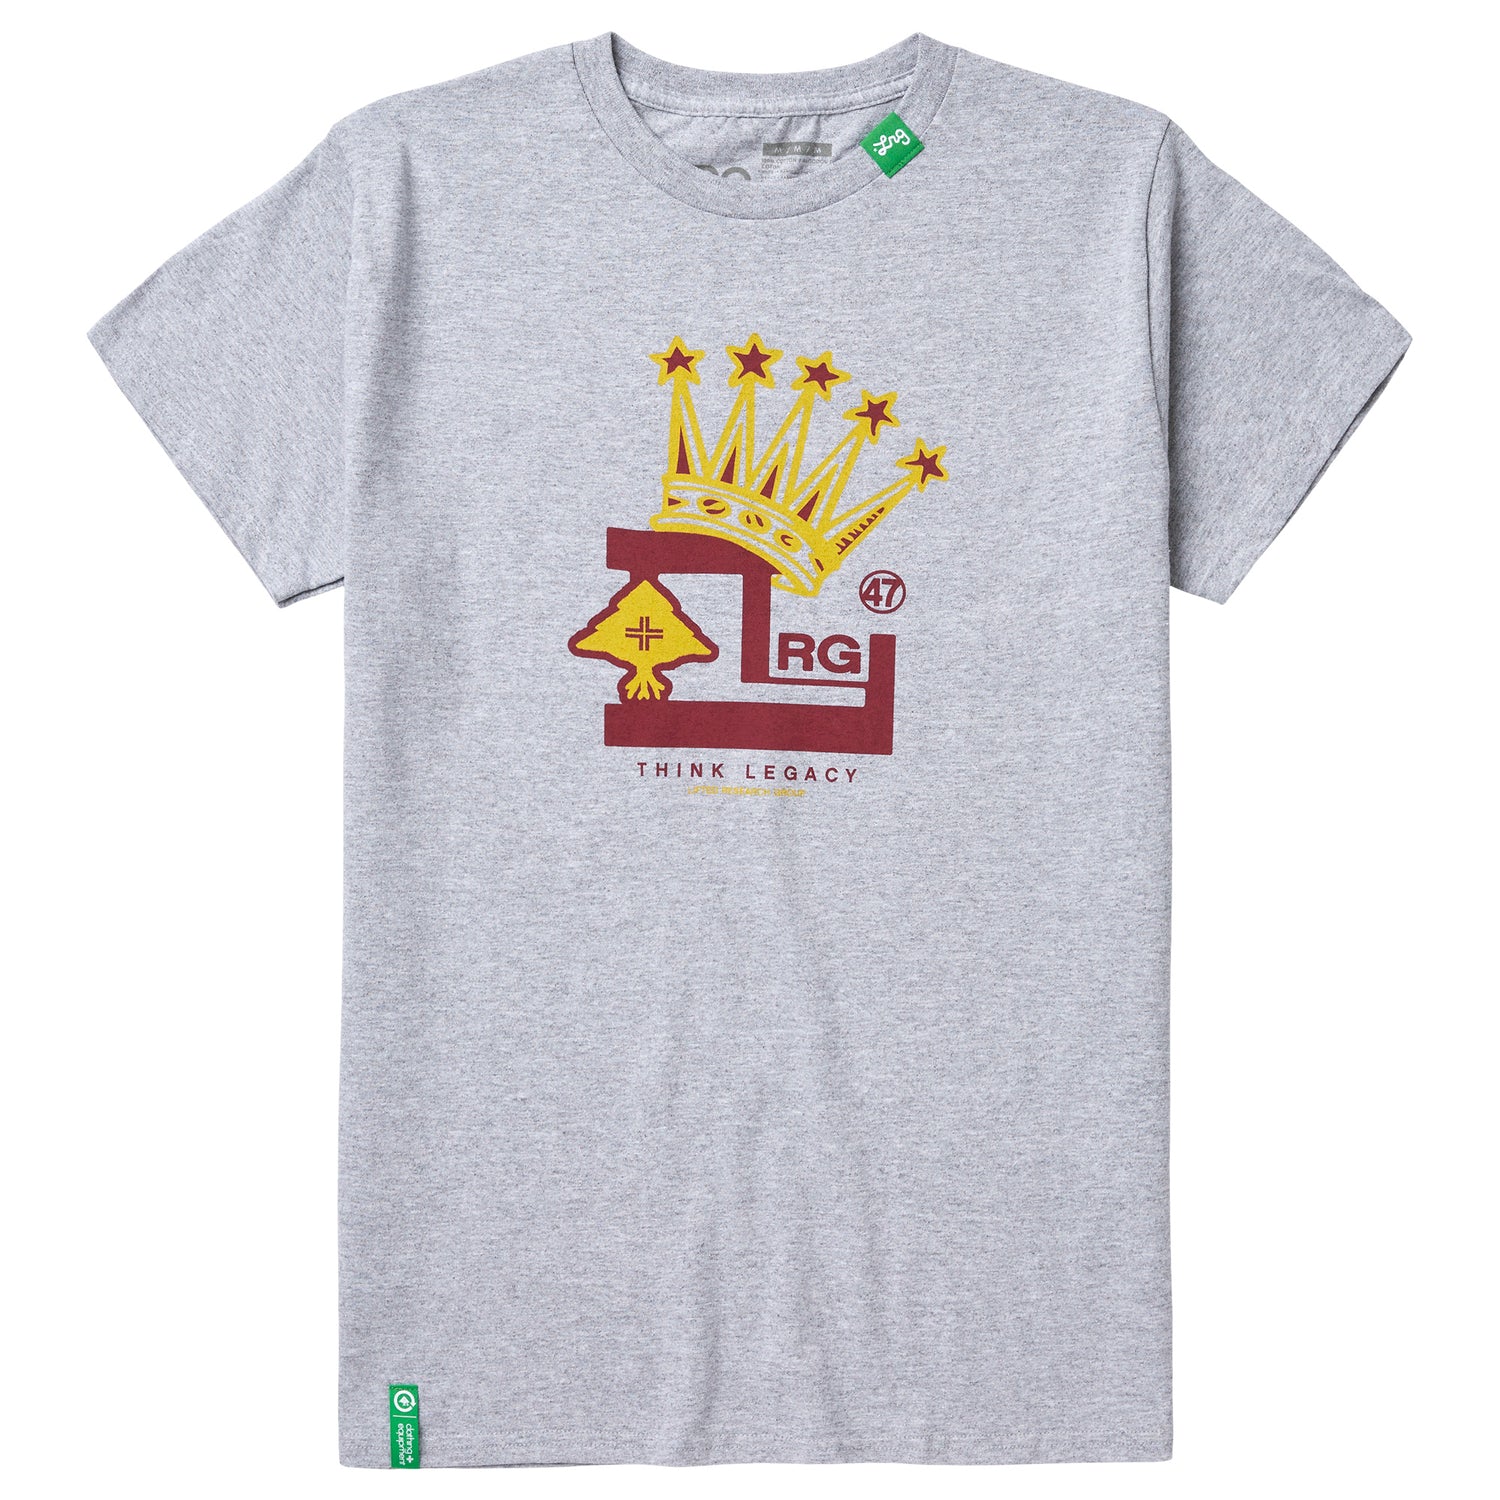 CROWDED LEGACY TEE - ATHLETIC GRAY